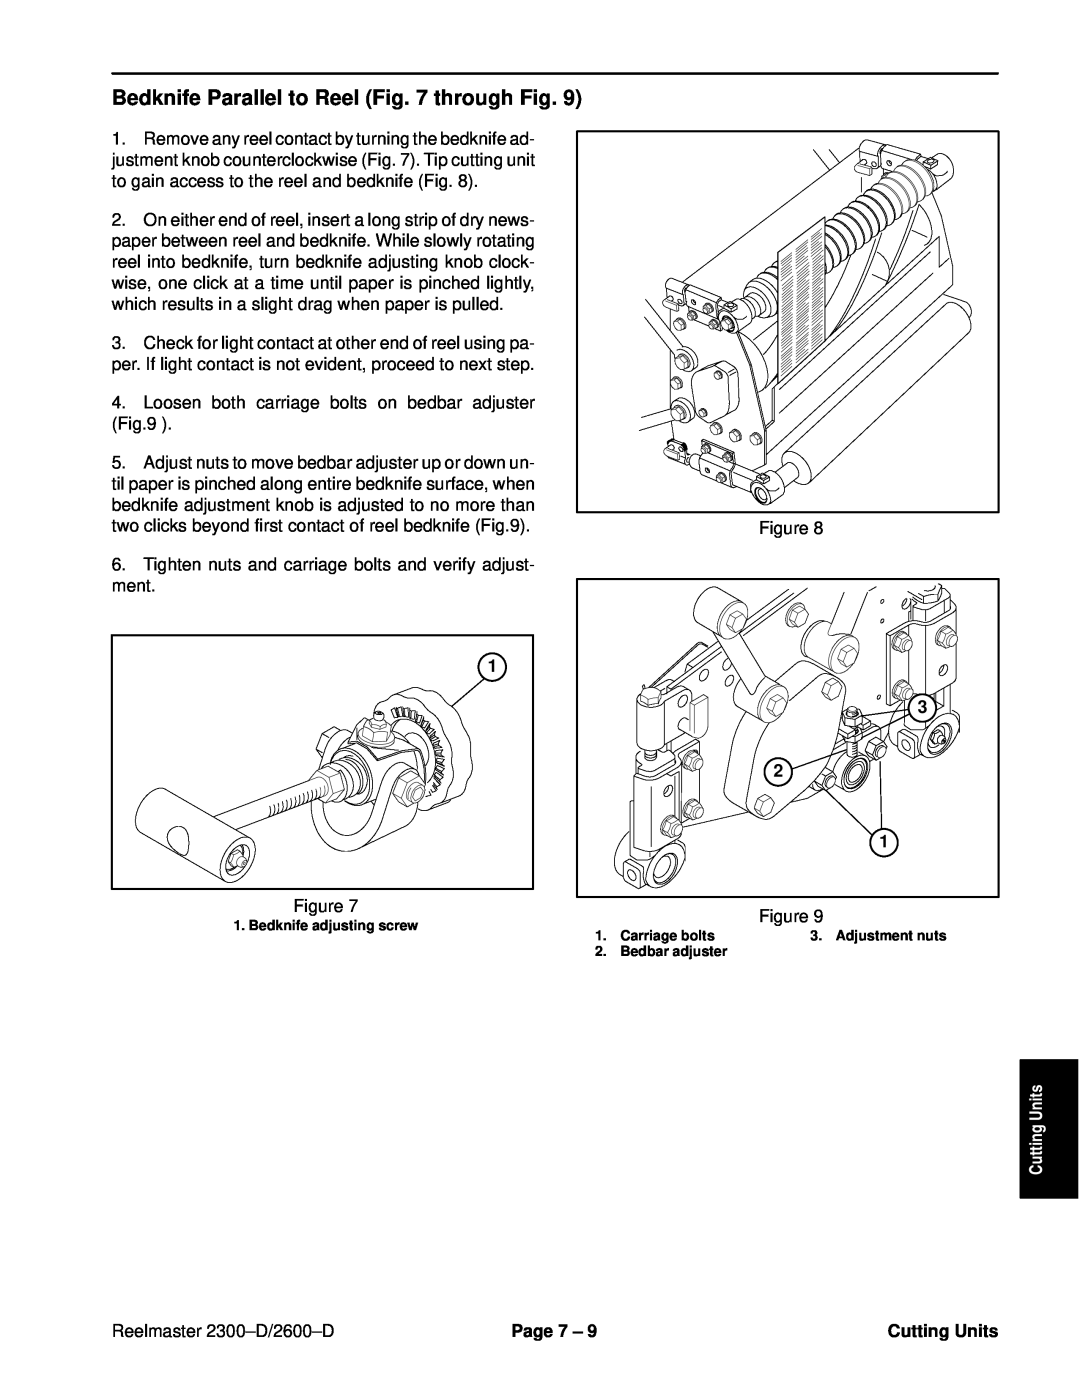 Toro 2600D, 2300-D service manual Bedknife Parallel to Reel through Fig, Cutting Units, Reelmaster 2300±D/2600±D, Page 7 ± 